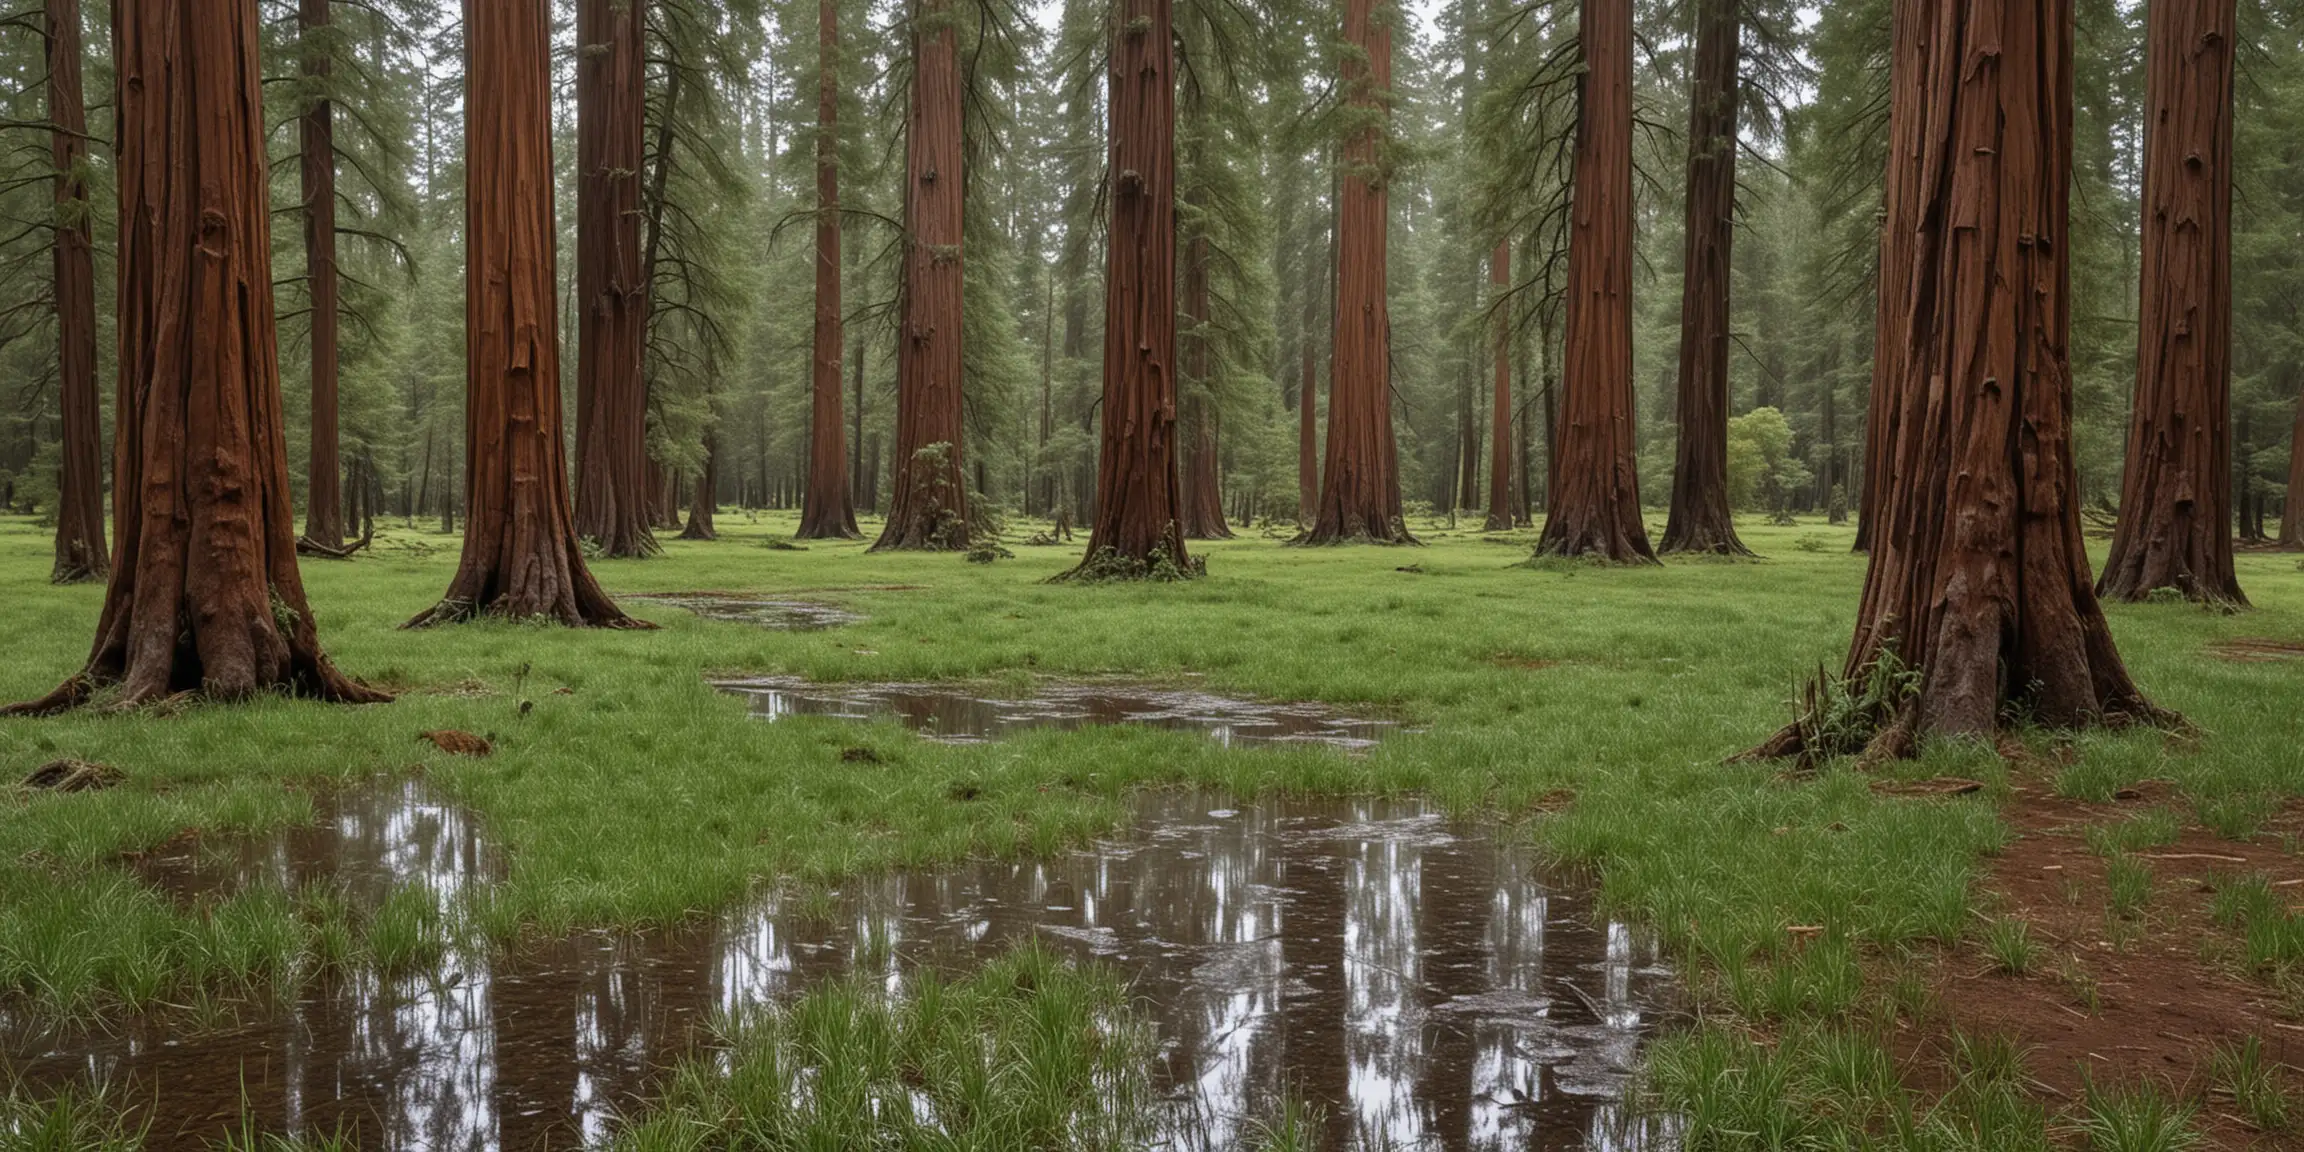 grassy field with puddles and redwood trees